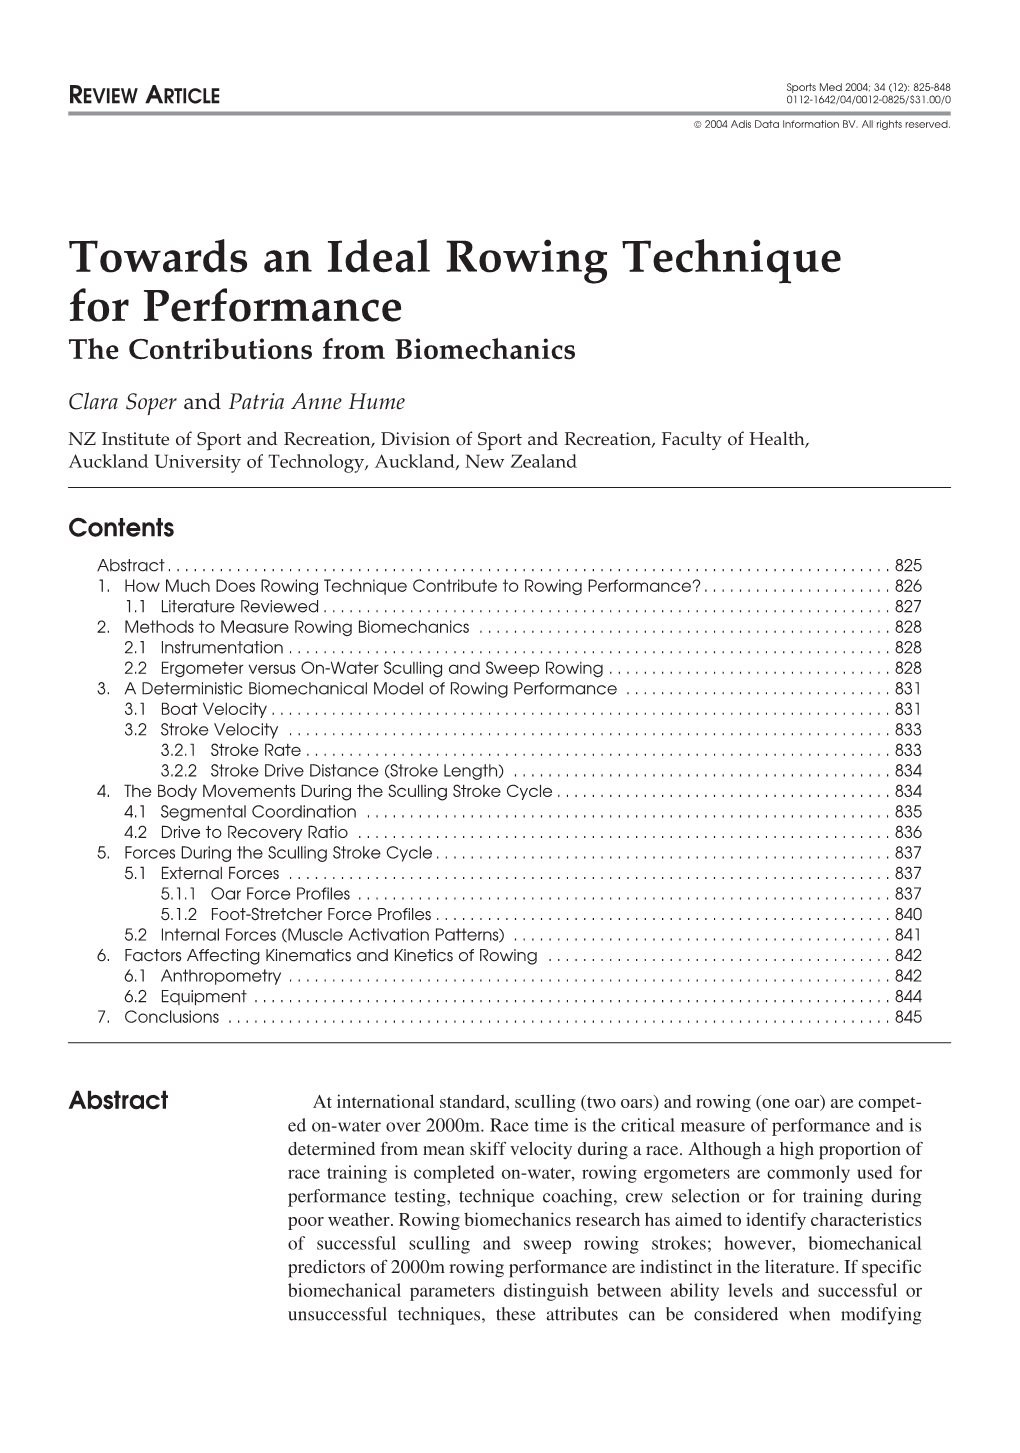 Towards an Ideal Rowing Technique for Performance the Contributions from Biomechanics